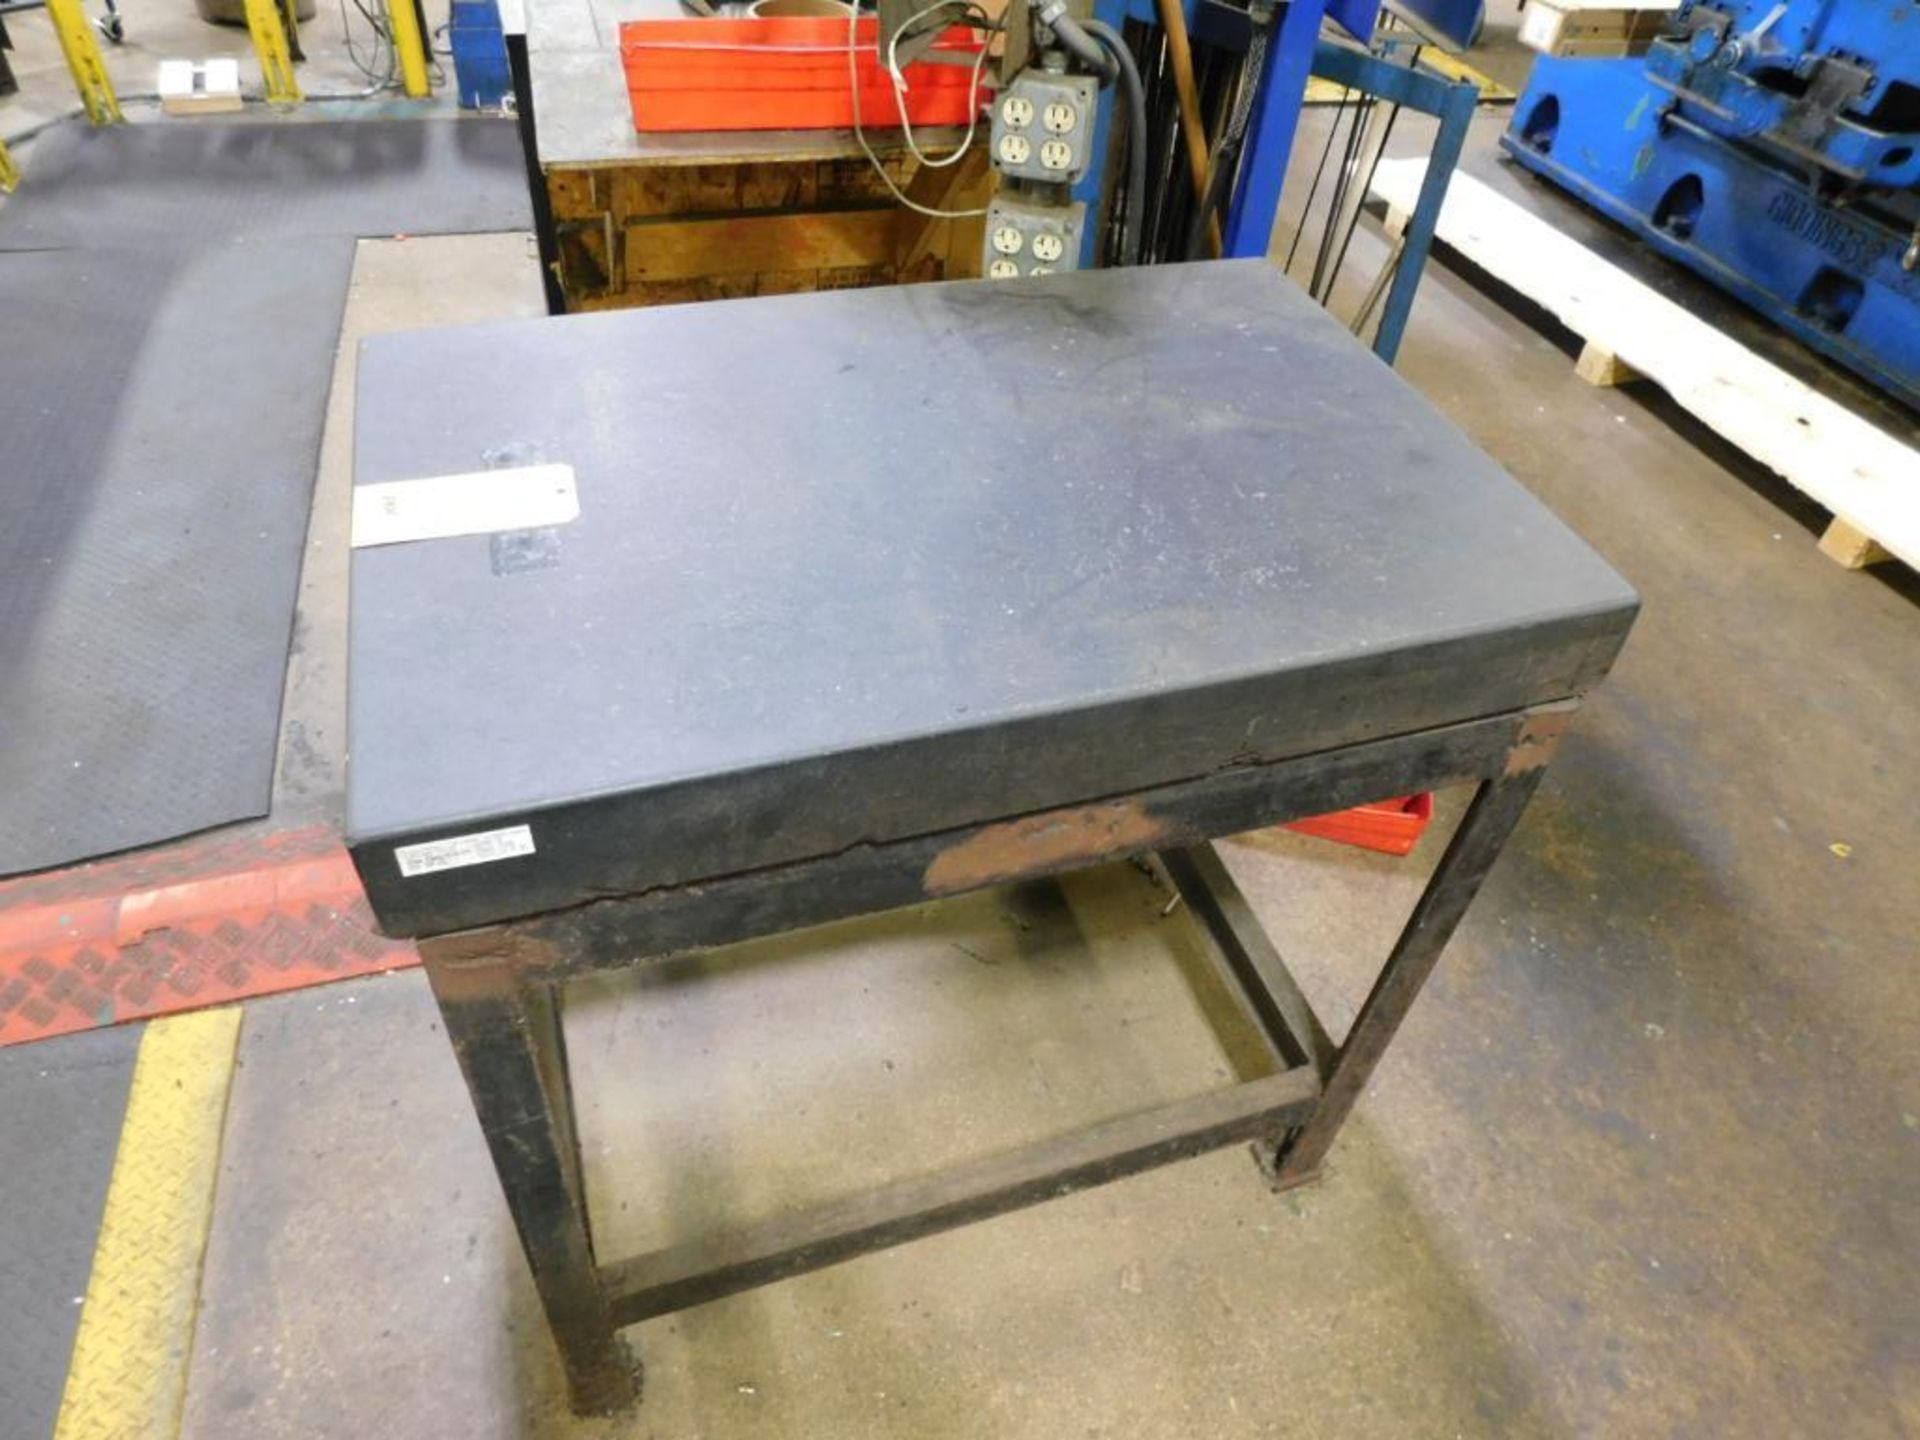 LOT: (1) 48" x 36" Granite Surface Plate on Steel Base, (1) 36" x 24" Granite Surface Plate on Steel - Image 2 of 4